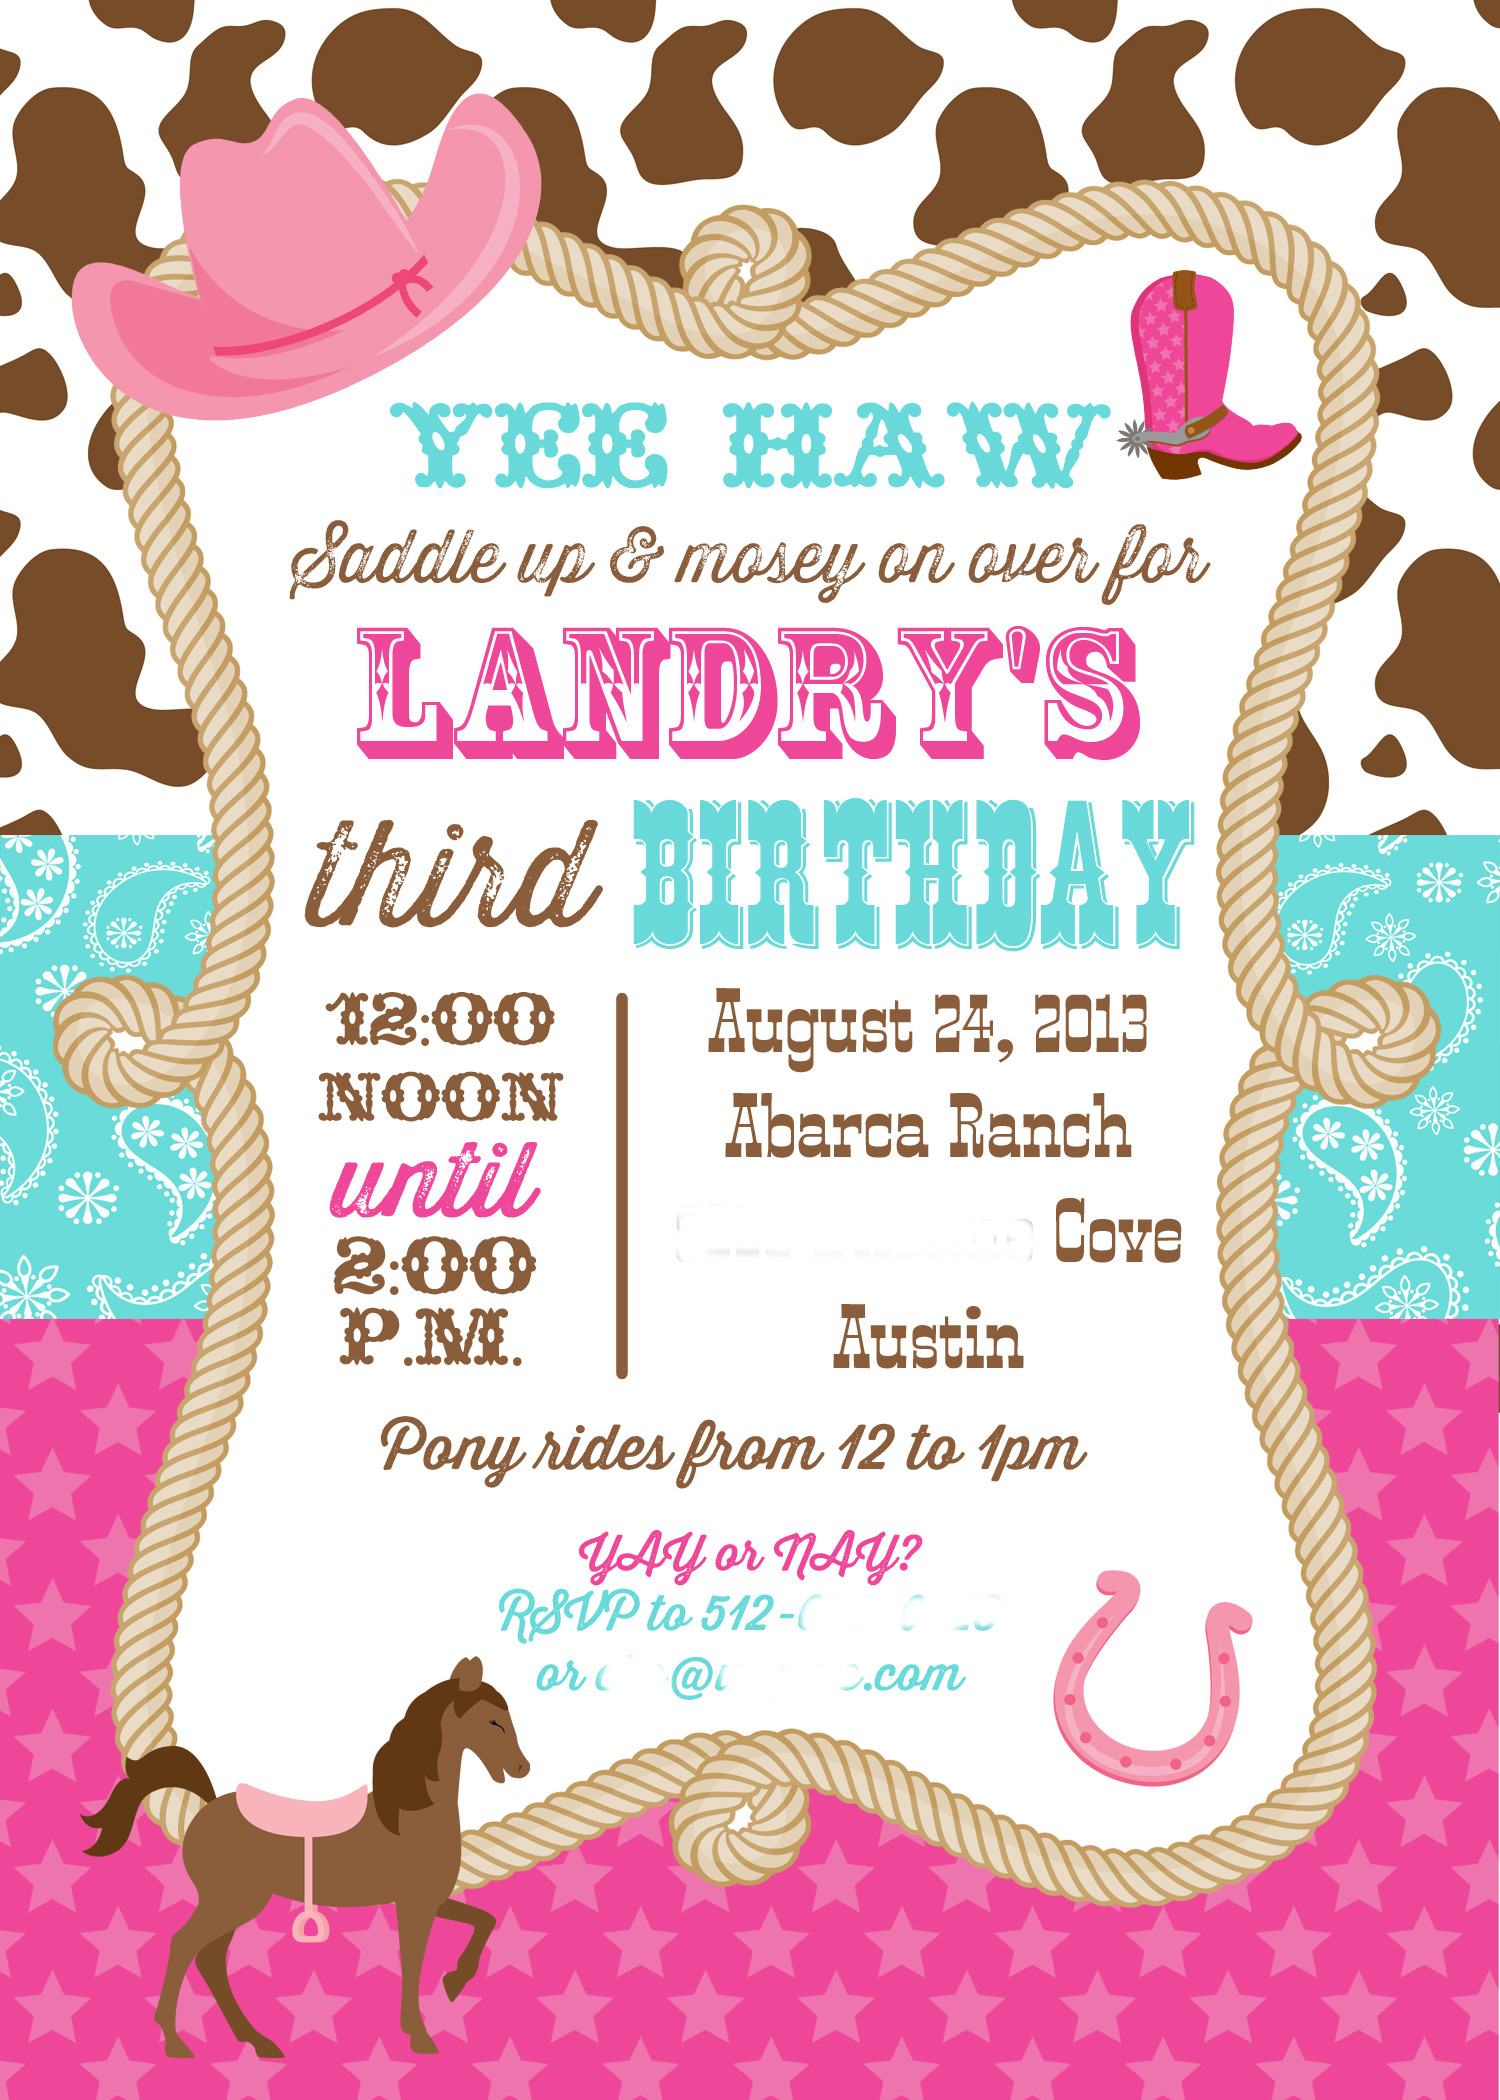 Cowgirl Birthday Party Invitations
 Landry’s Cowgirl 3rd Birthday Party